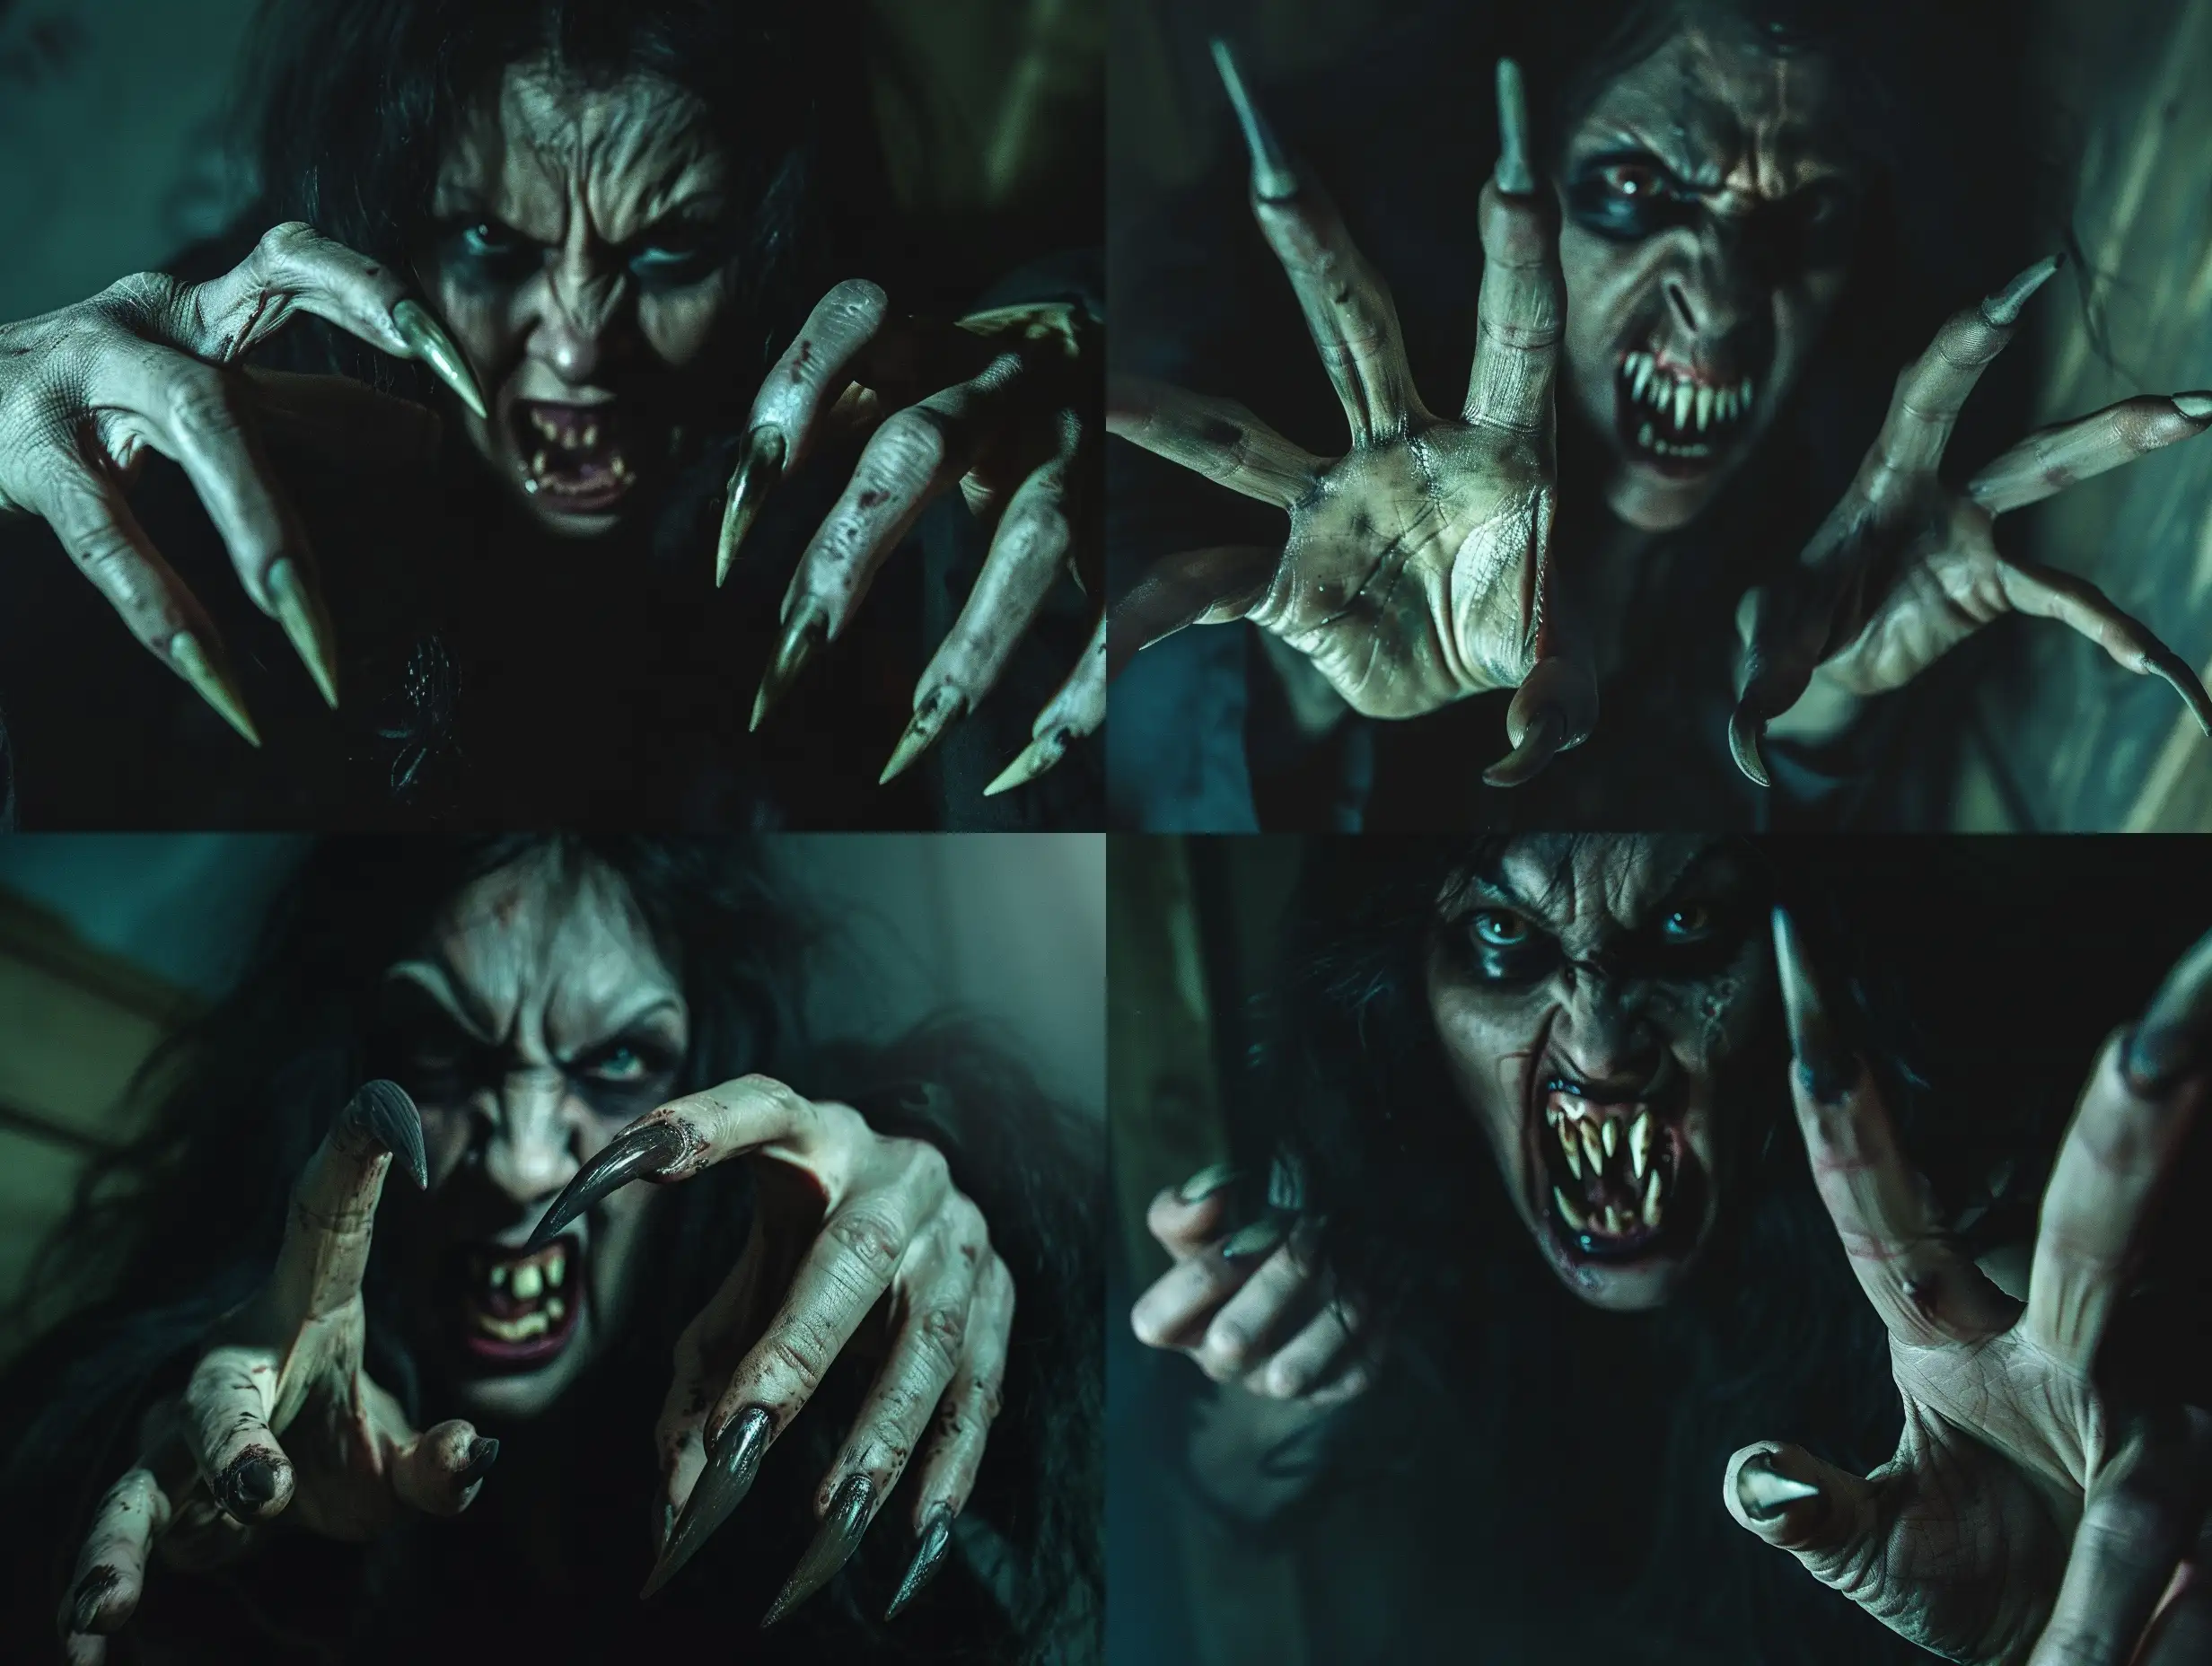 Subject: The main subject of the image is a wild and ugly vampire woman, depicted in a photorealistic style. She has extra long pointed fingernails resembling claws, and her mouth is open with fang-like teeth, giving her a threatening appearance. 
Setting: The scene is set inside a dark room, adding to the eerie atmosphere. The darkness enhances the horror element and creates a cinematic feel. 
Style/Coloring: The image is hyper-realistic with high detail and photo detailing, contributing to the photorealistic quality. The coloring is dark and haunting, with atmospheric lighting intensifying the creepy vibe. 
Action/Items: The vampire woman appears to have just emerged from the darkness, adding a sense of suspense and fear. Her posture and expression convey aggression and terror. 
Costume/Appearance: The vampire's appearance is grotesque and terrifying, with detailed nails and realistic anatomy, including five fingers on each hand. Her undead look suggests that she has climbed out of a grave. 
Accessories: The vampire's only accessories are her long, pointed fingernails, which resemble the claws of a predator, enhancing her menacing appearance.